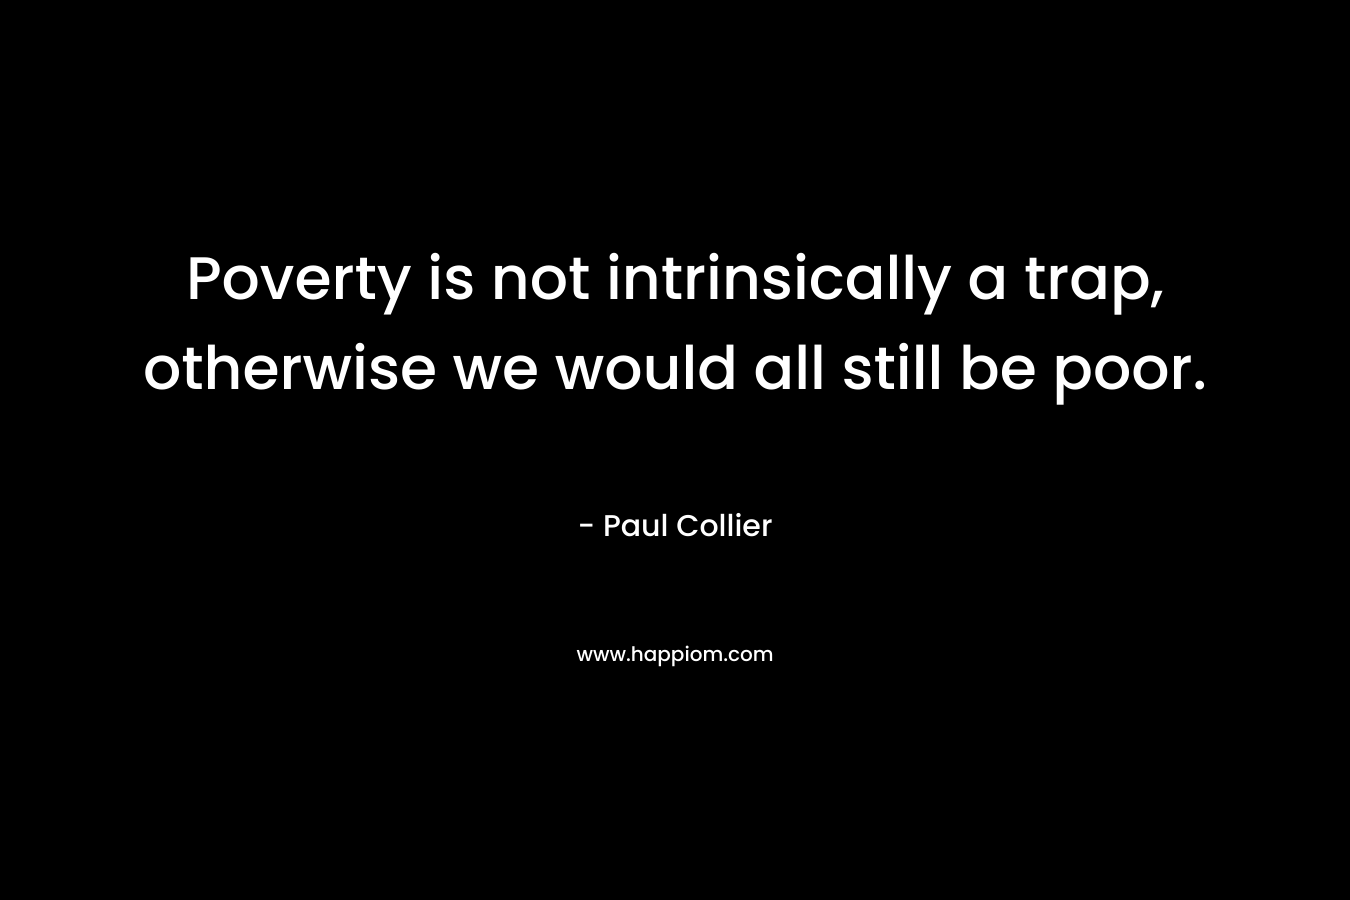 Poverty is not intrinsically a trap, otherwise we would all still be poor.